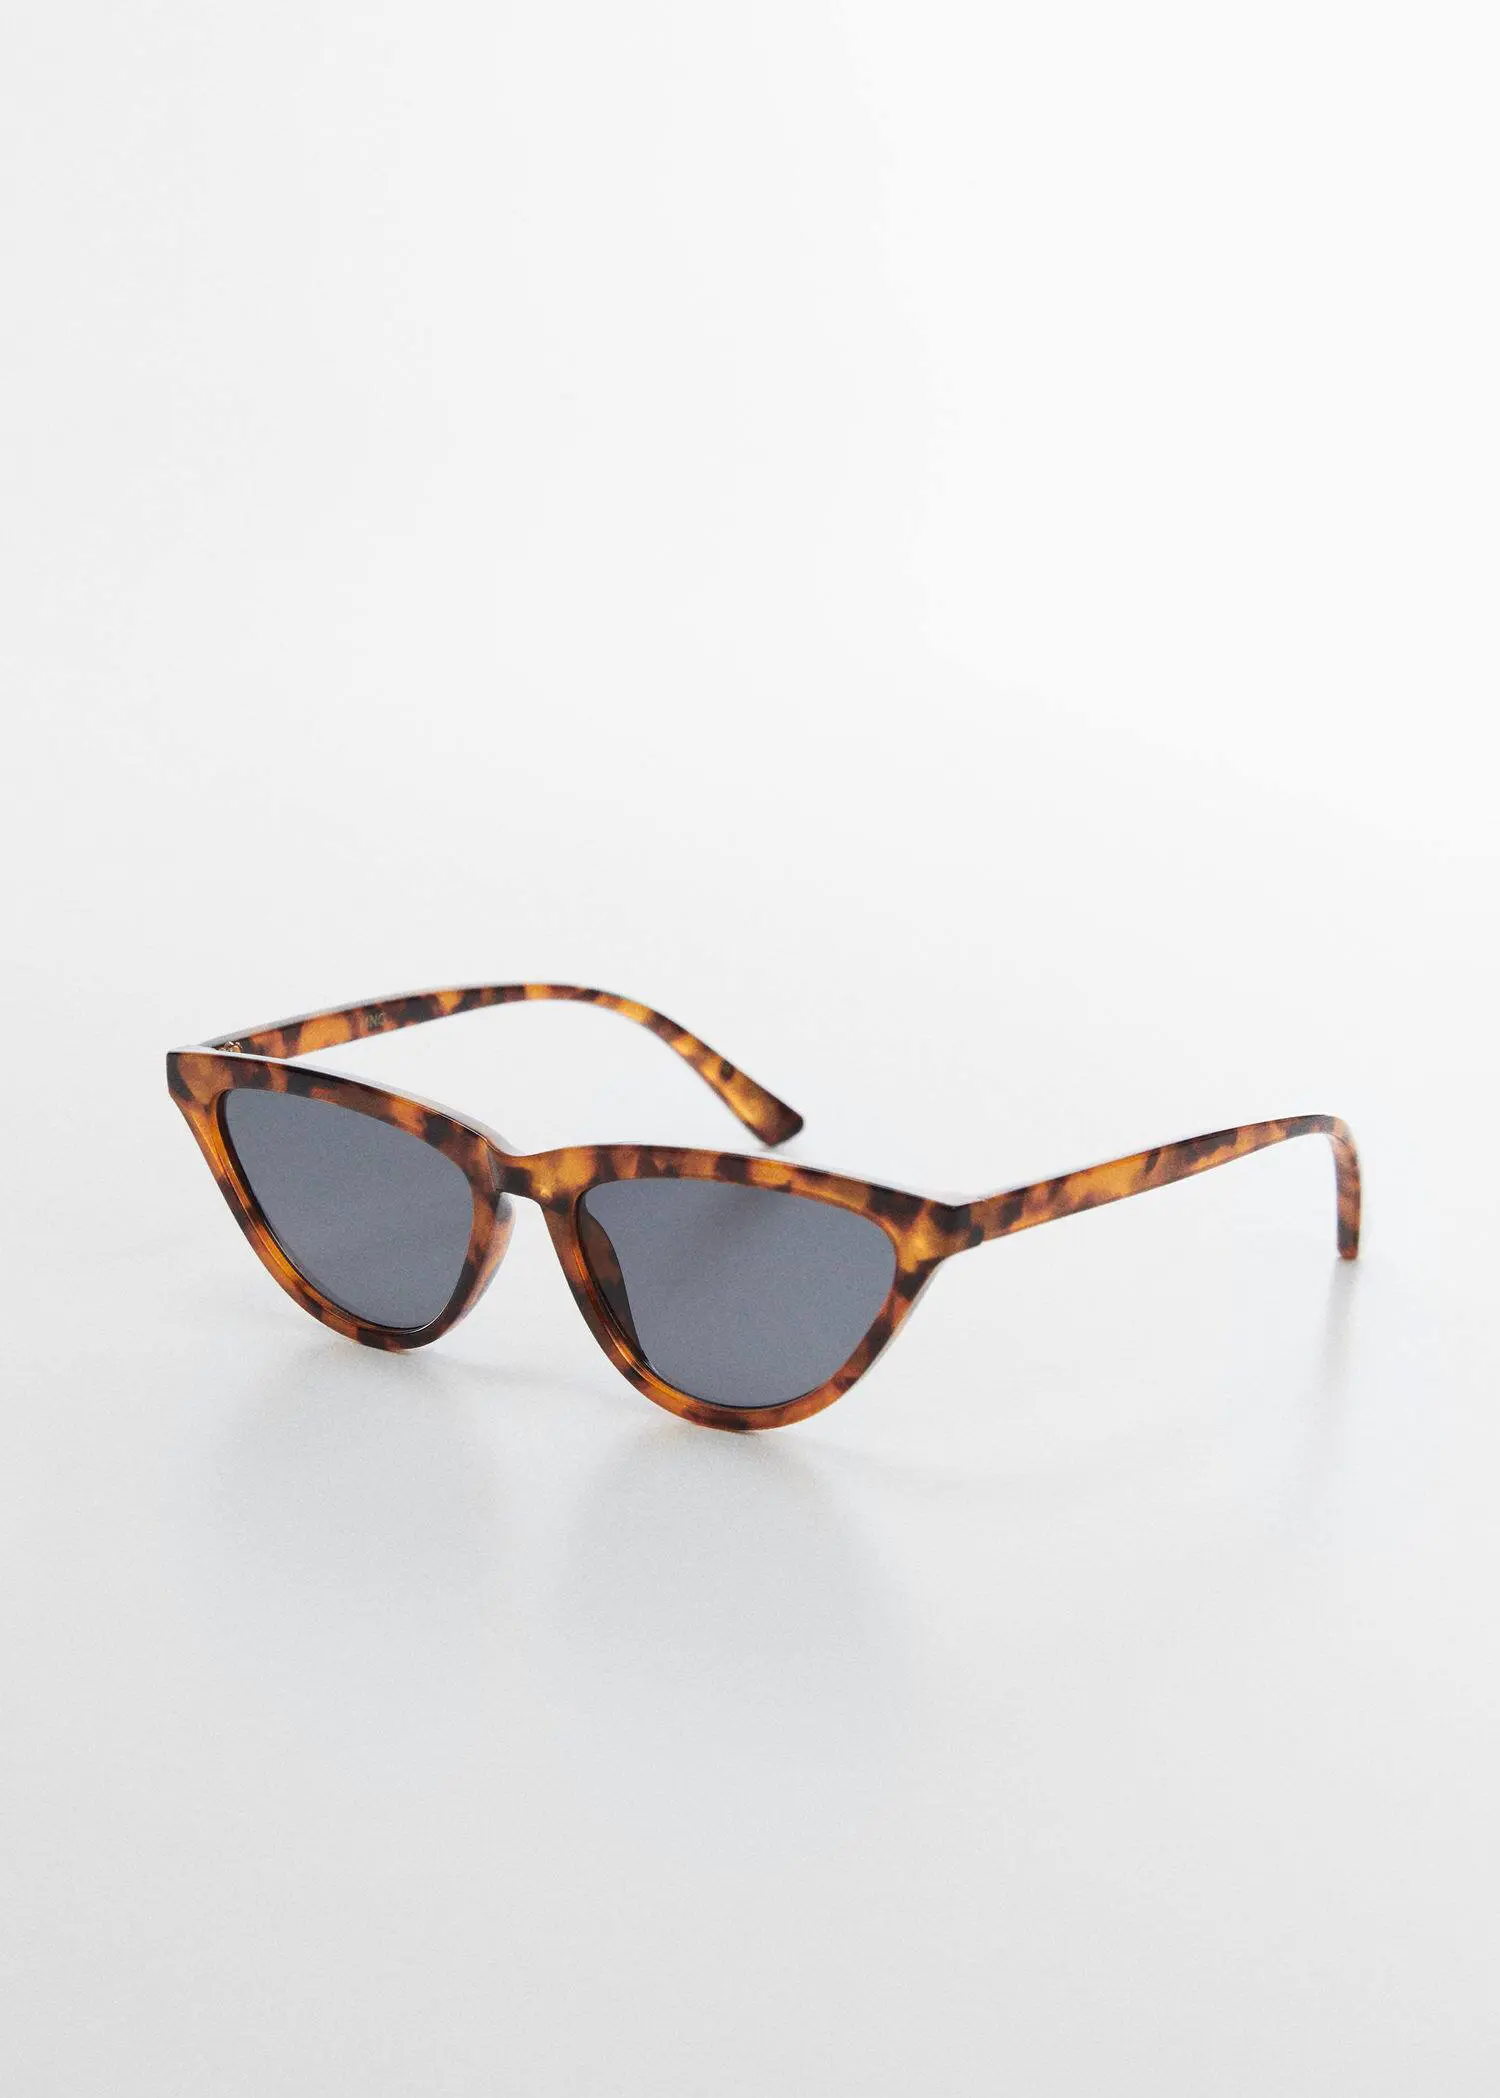 Mango Retro style sunglasses. a pair of sunglasses sitting on top of a white table. 